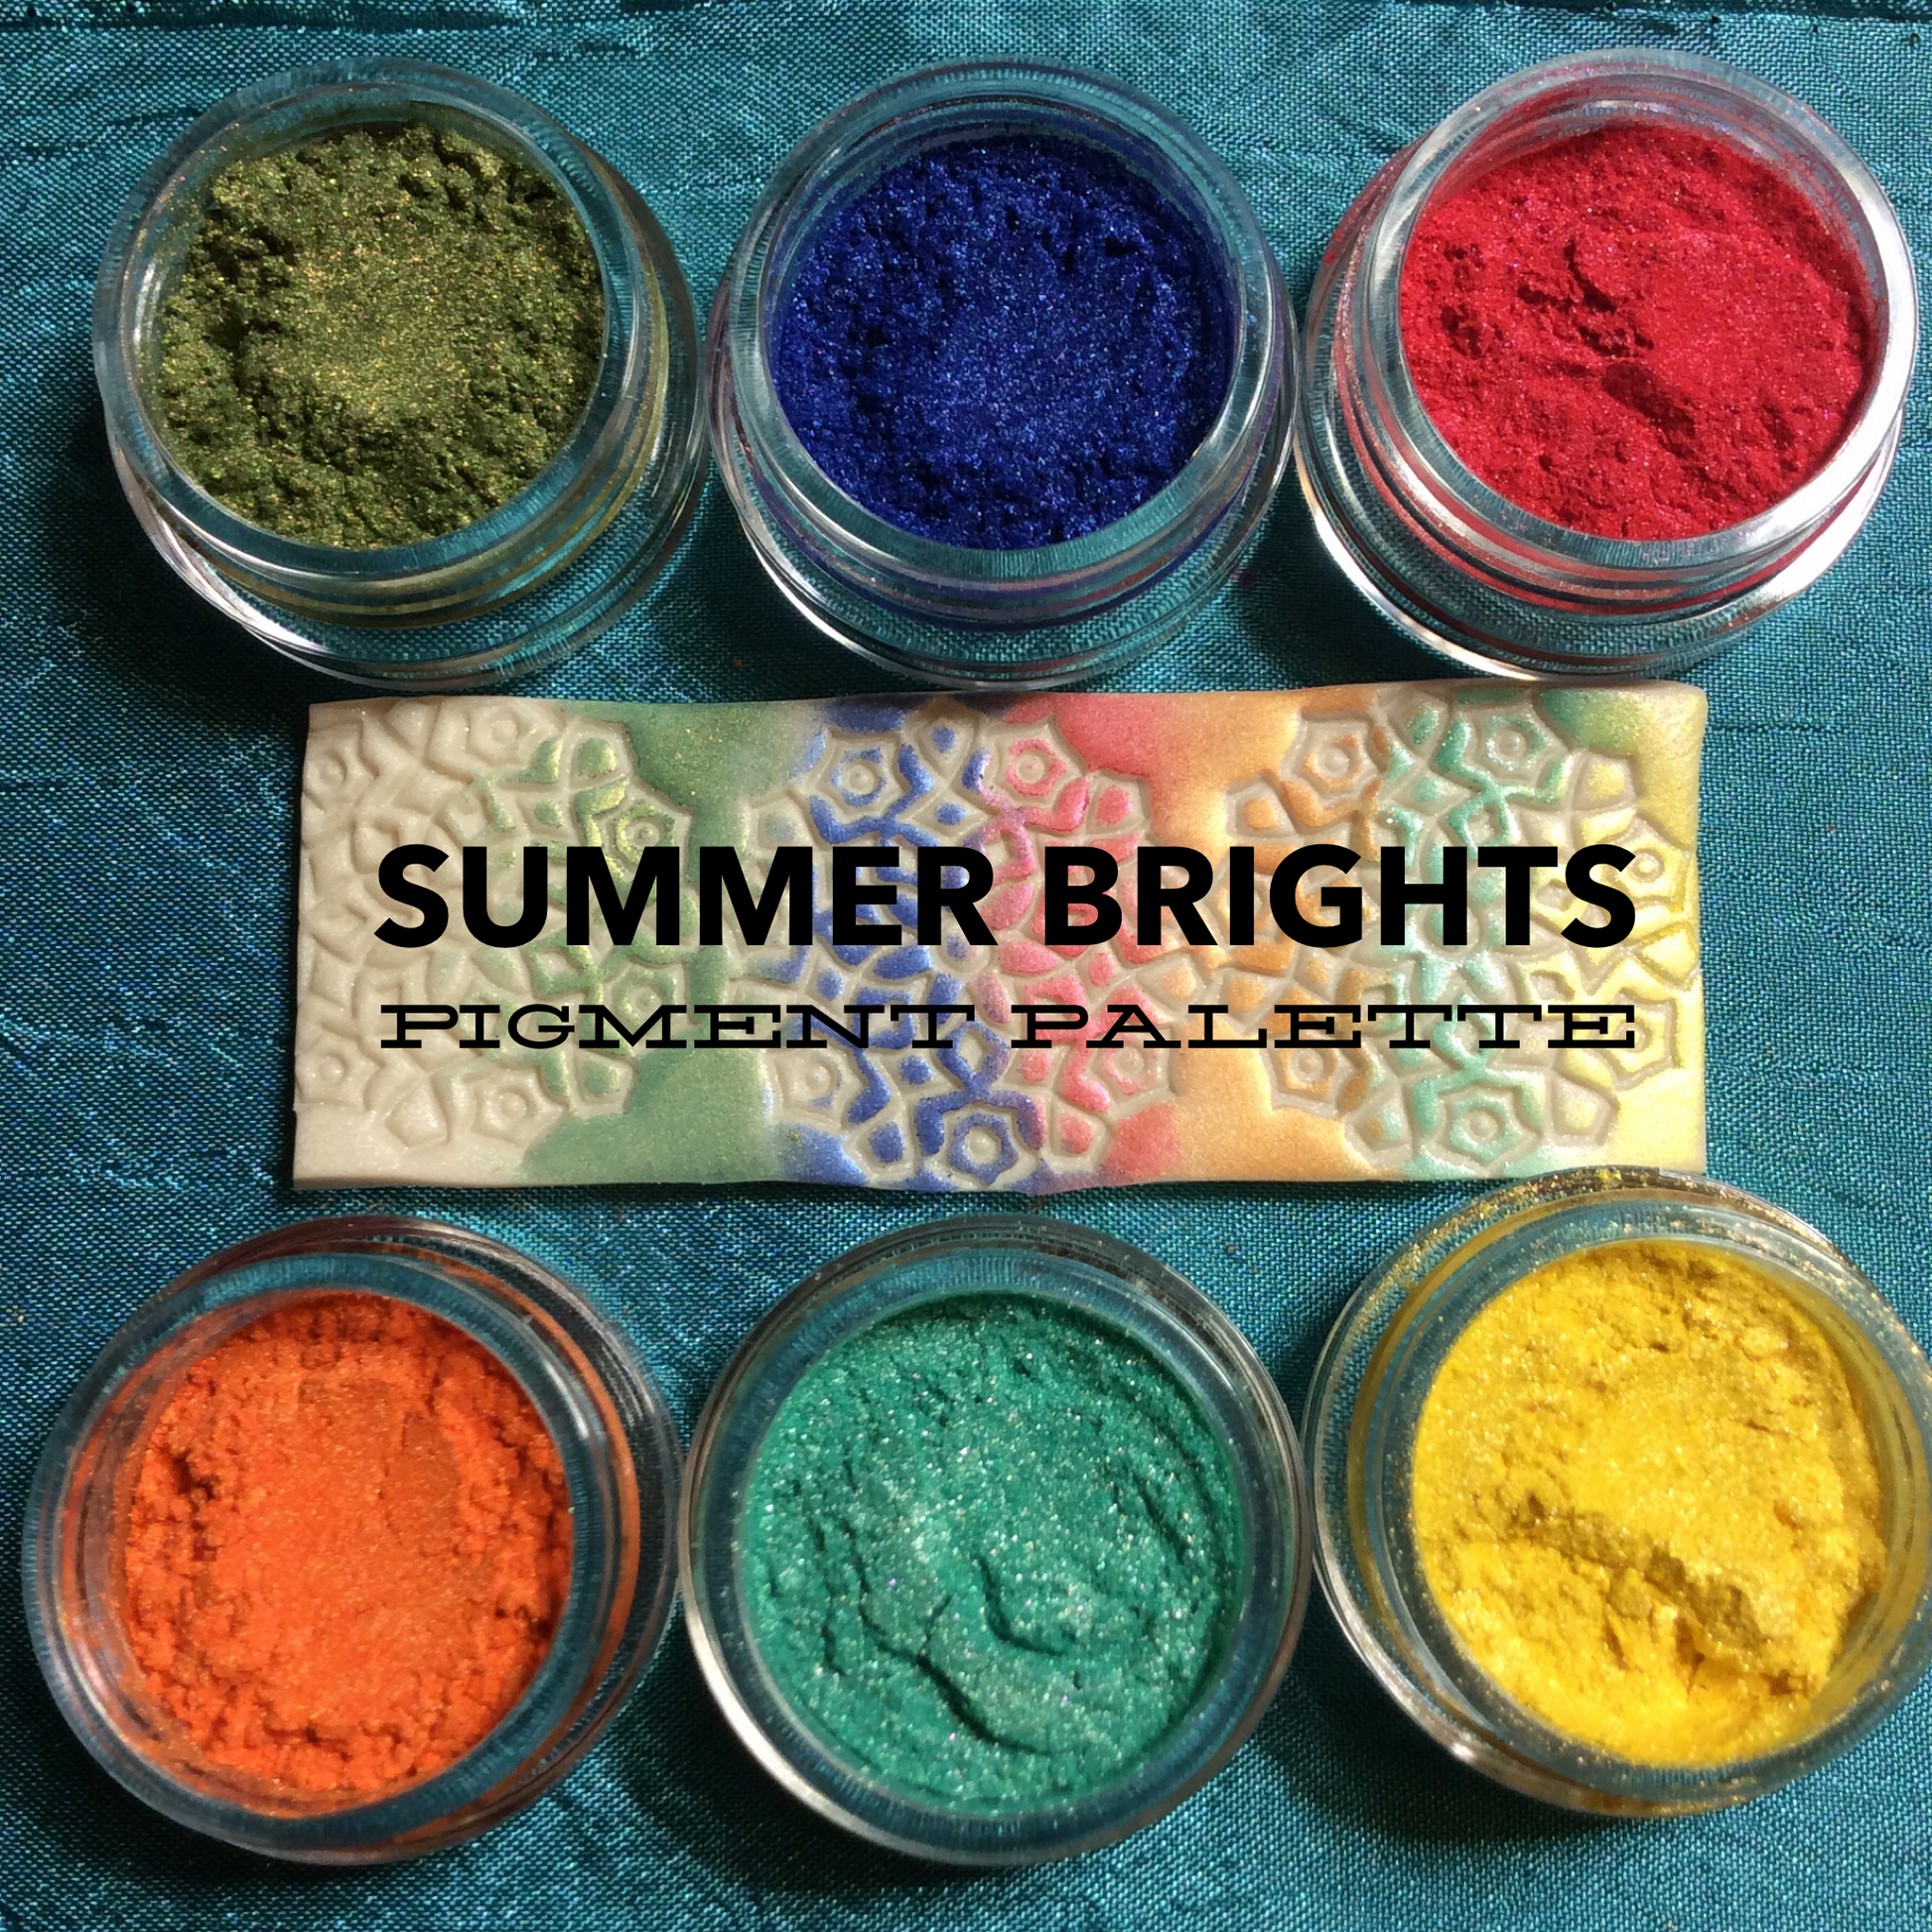 Pigments Mica Powders Summer Brights for Polymer Clay, Art Jewelry and